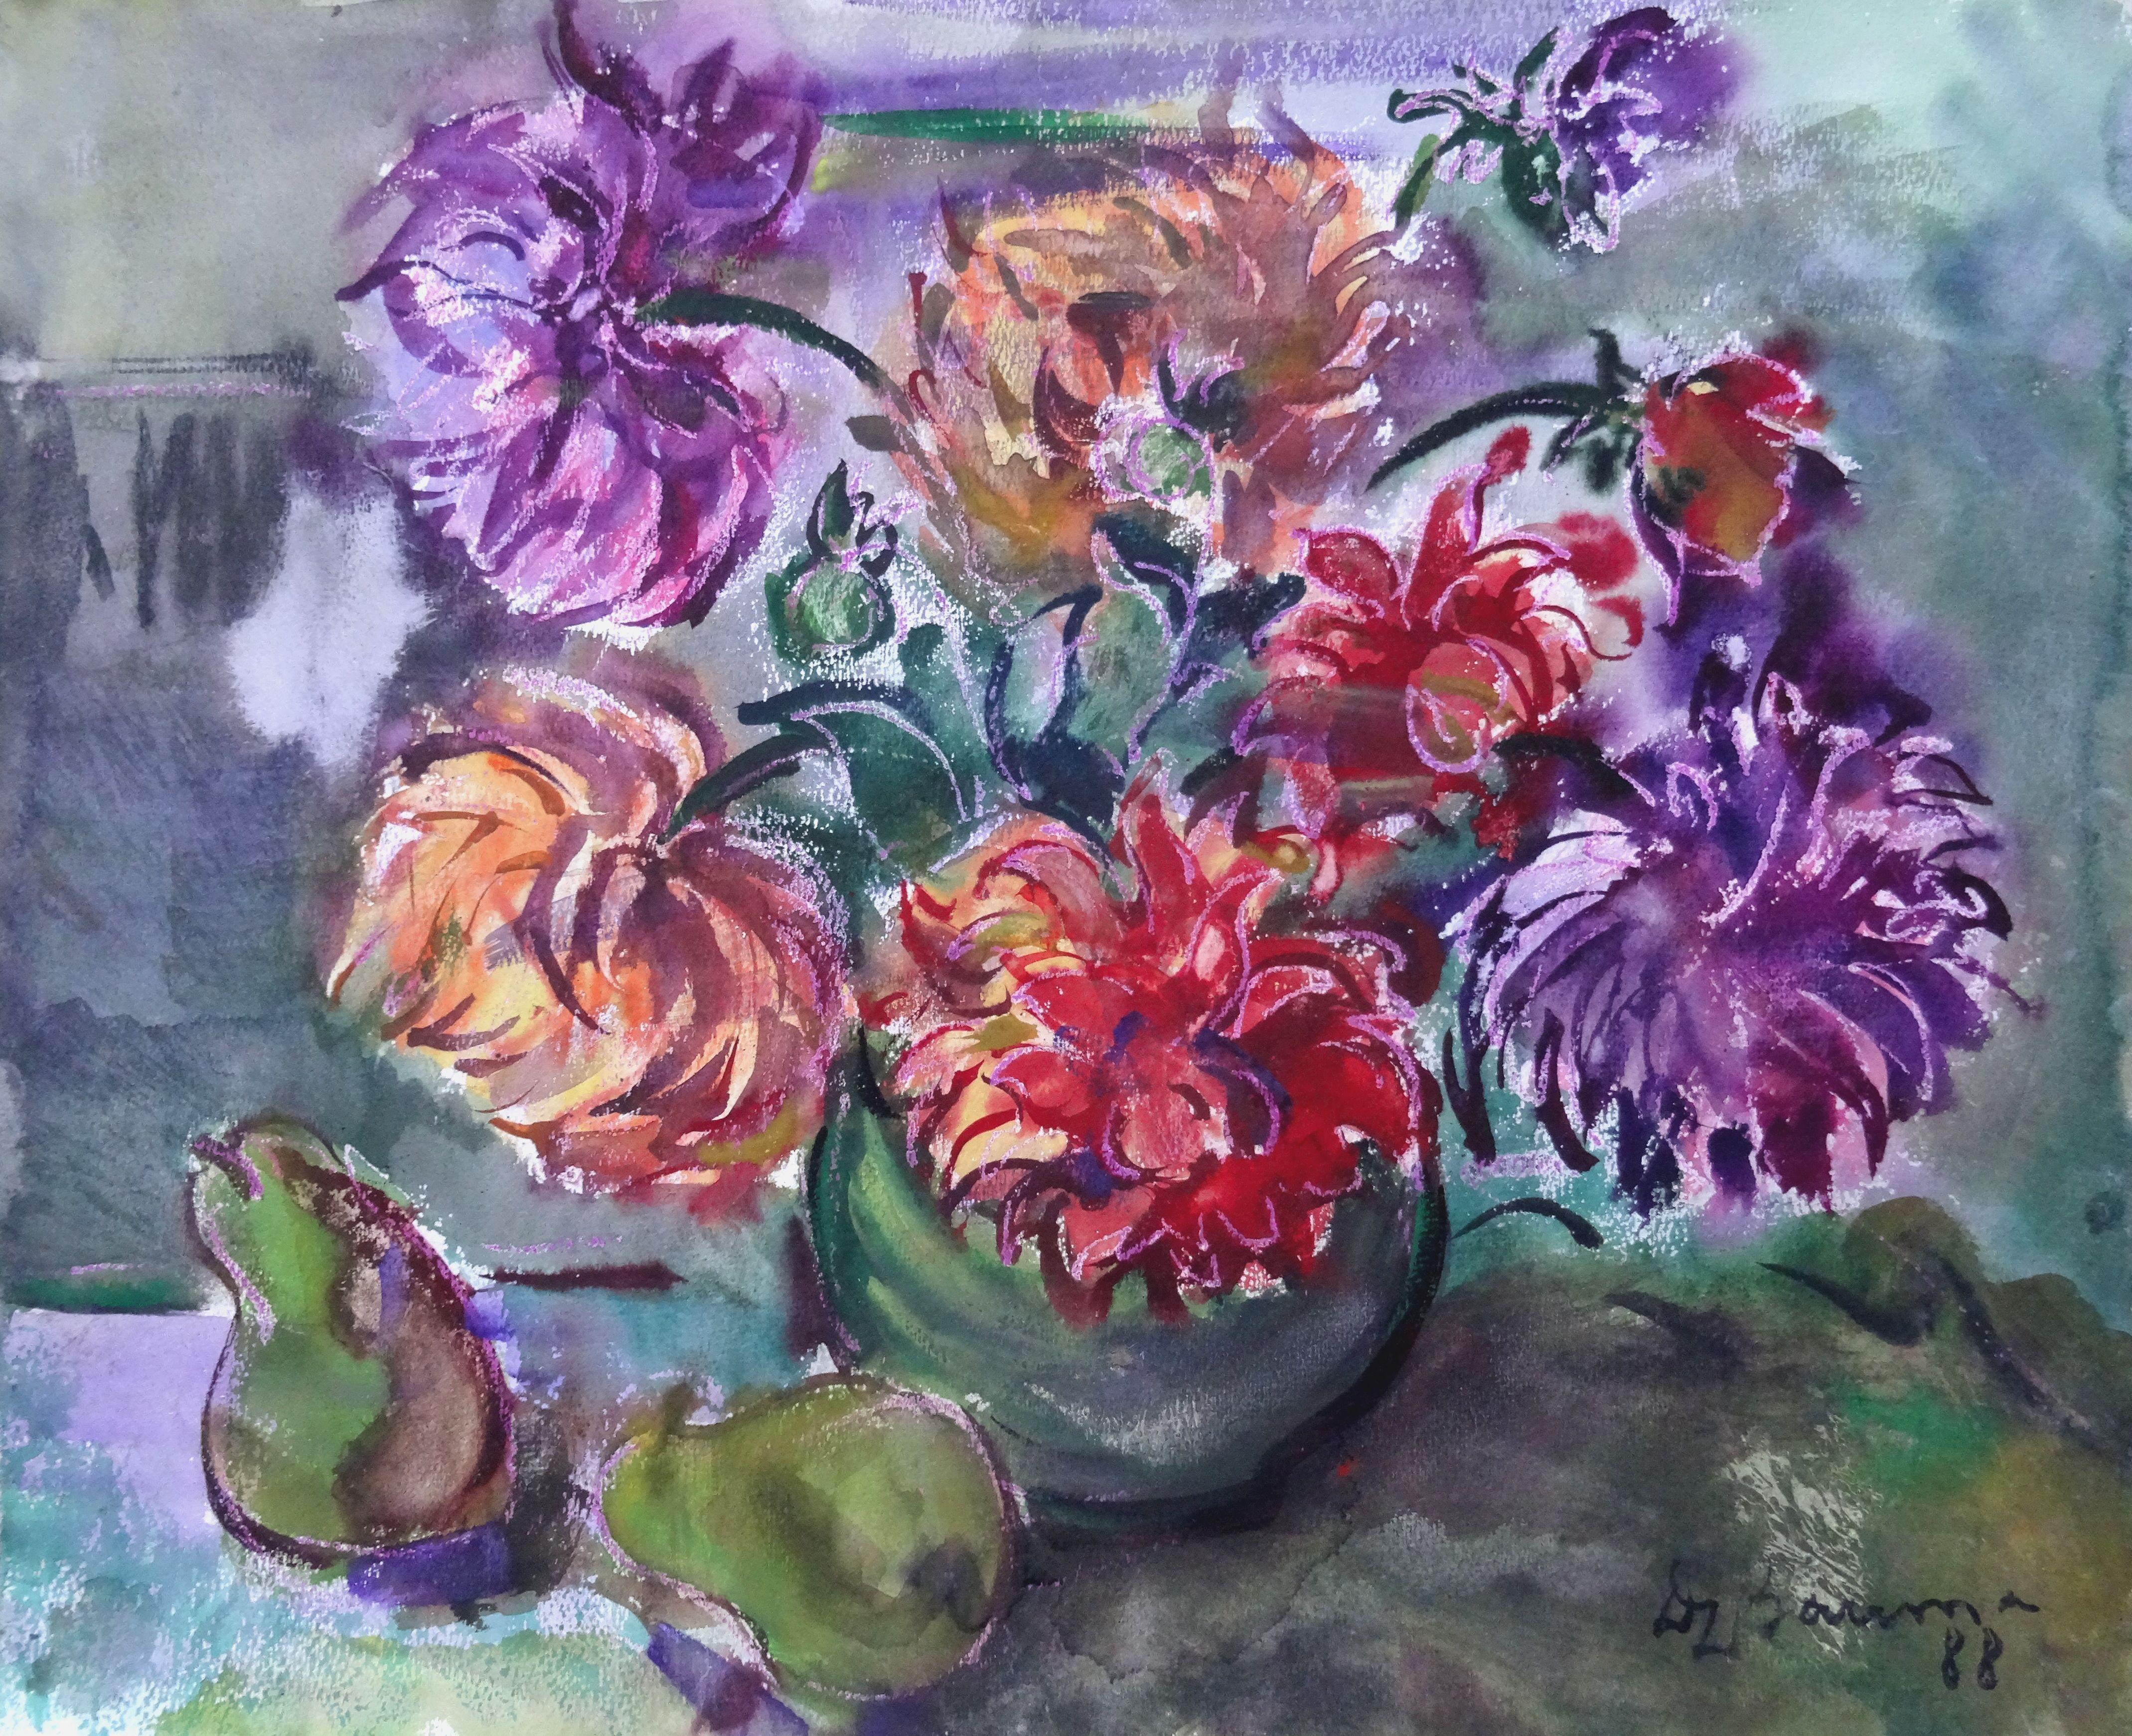 Still life with dahlias and pears. 1988. Paper, watercolor, 50.5x62.5 cm